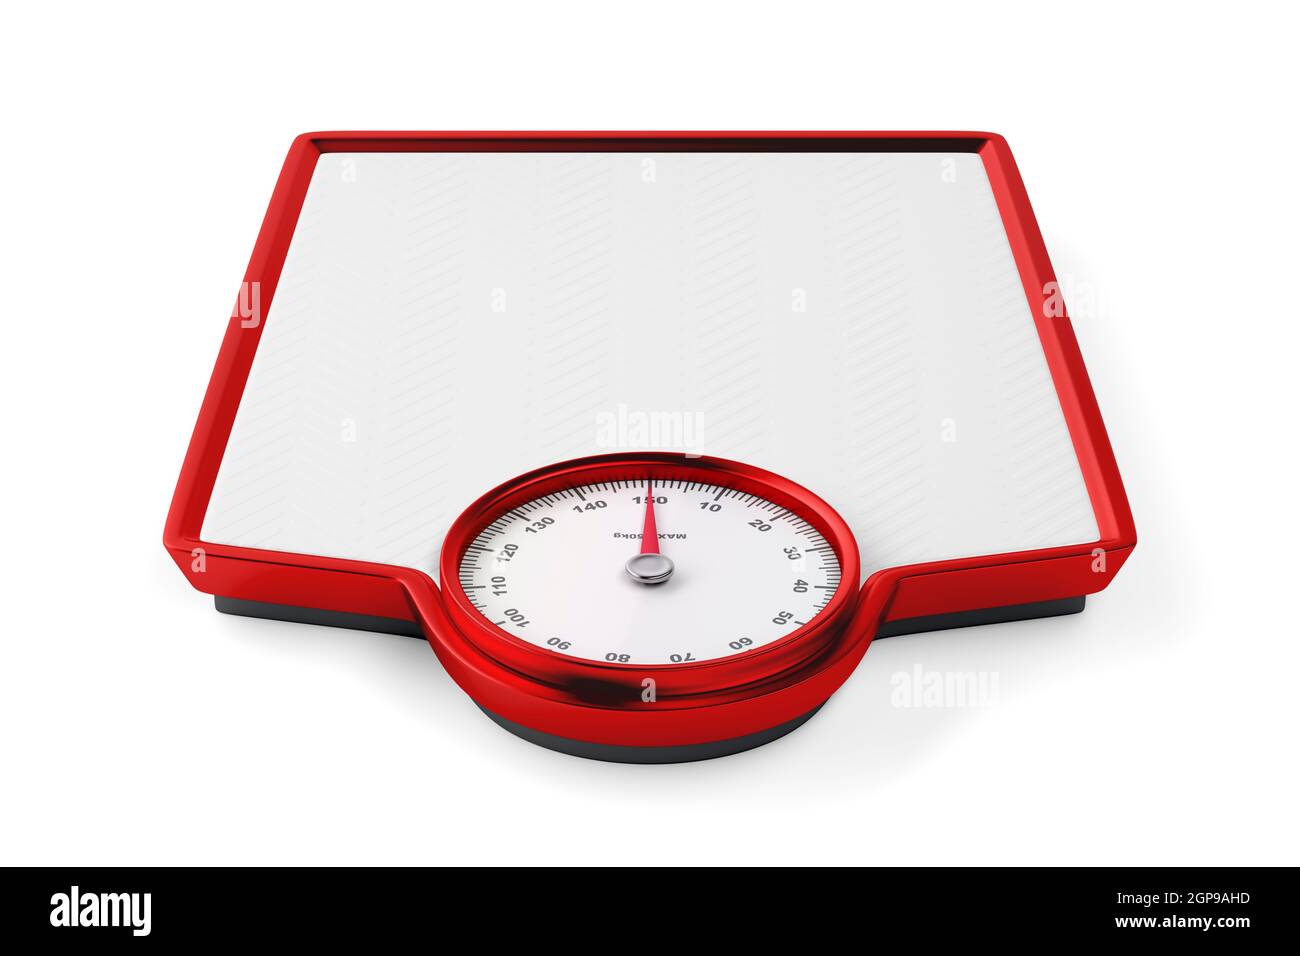 Analog Weight Scale Isolated Stock Photo, Picture and Royalty Free Image.  Image 28865250.